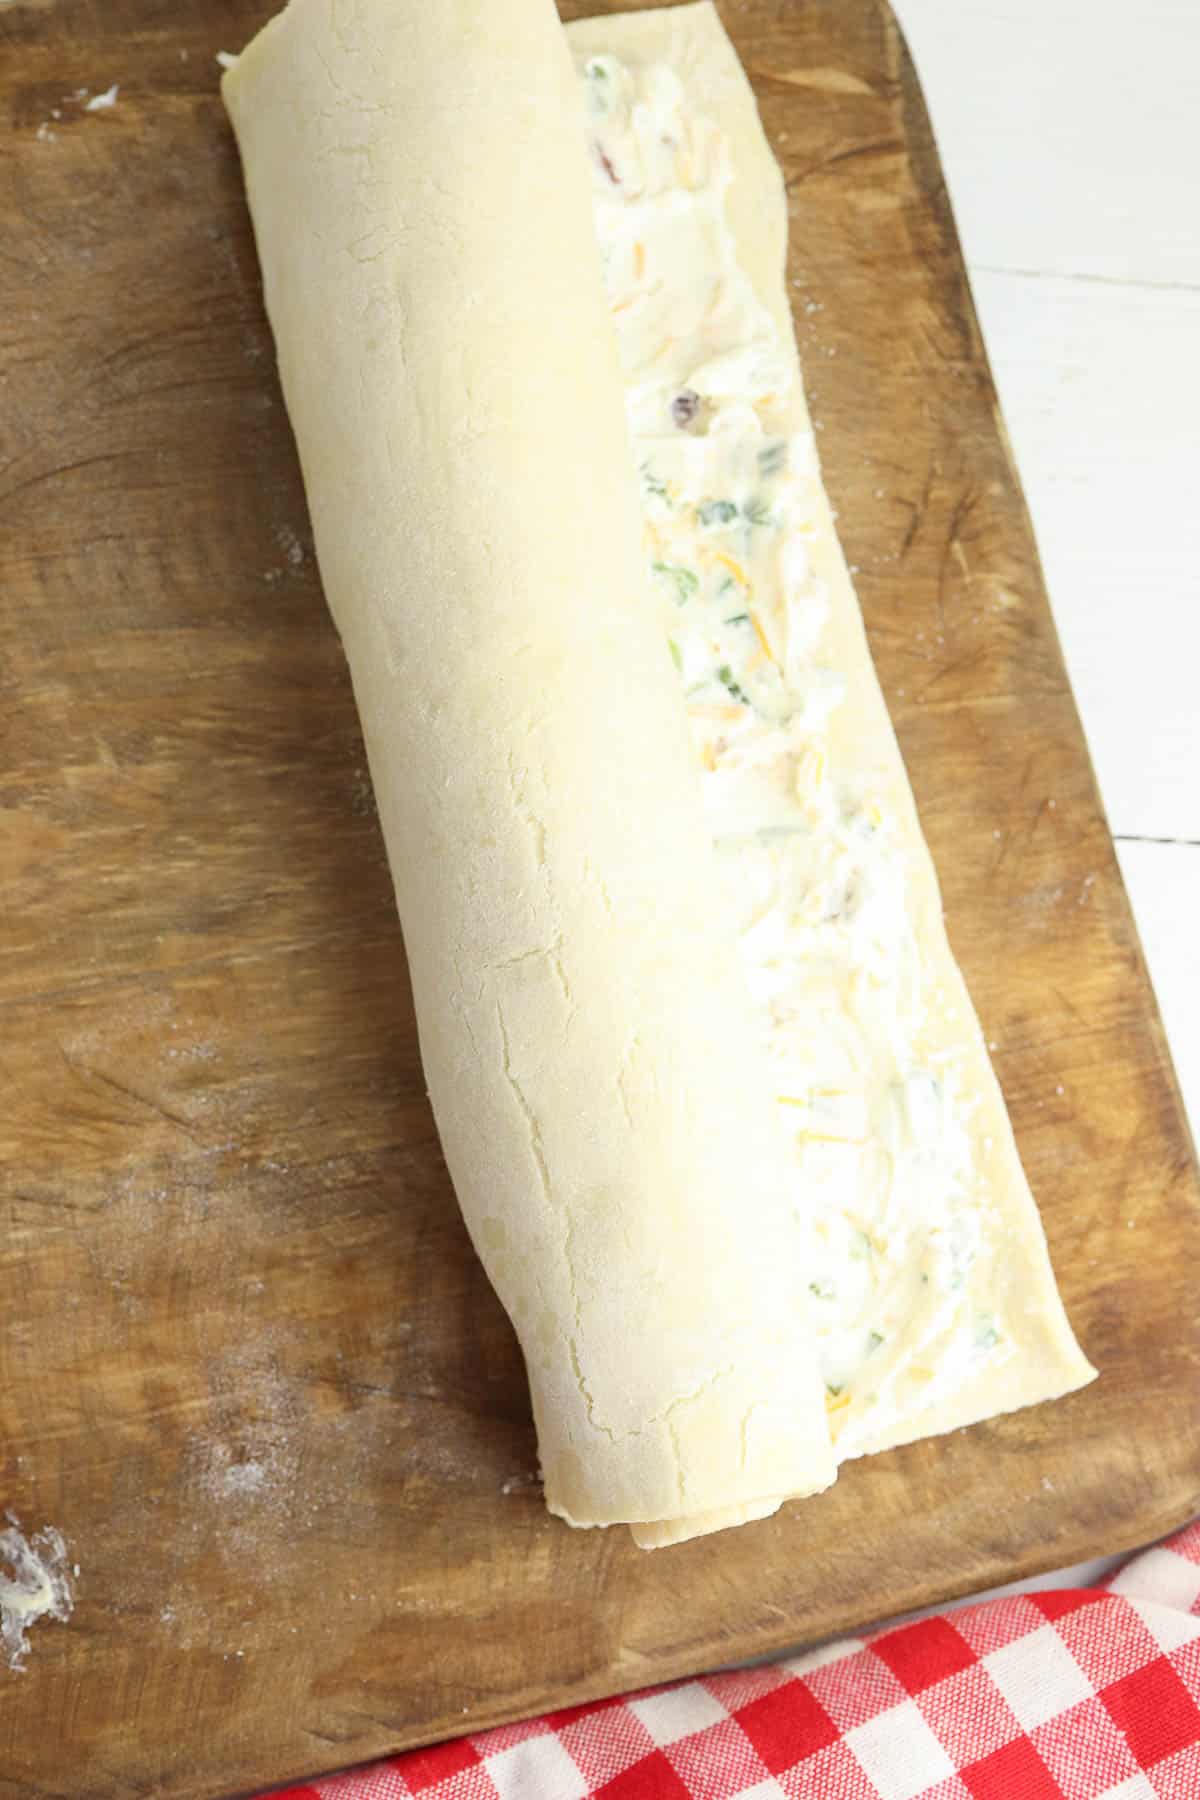 puff pastry dough rolled into a log with cream cheese mixture in the center.